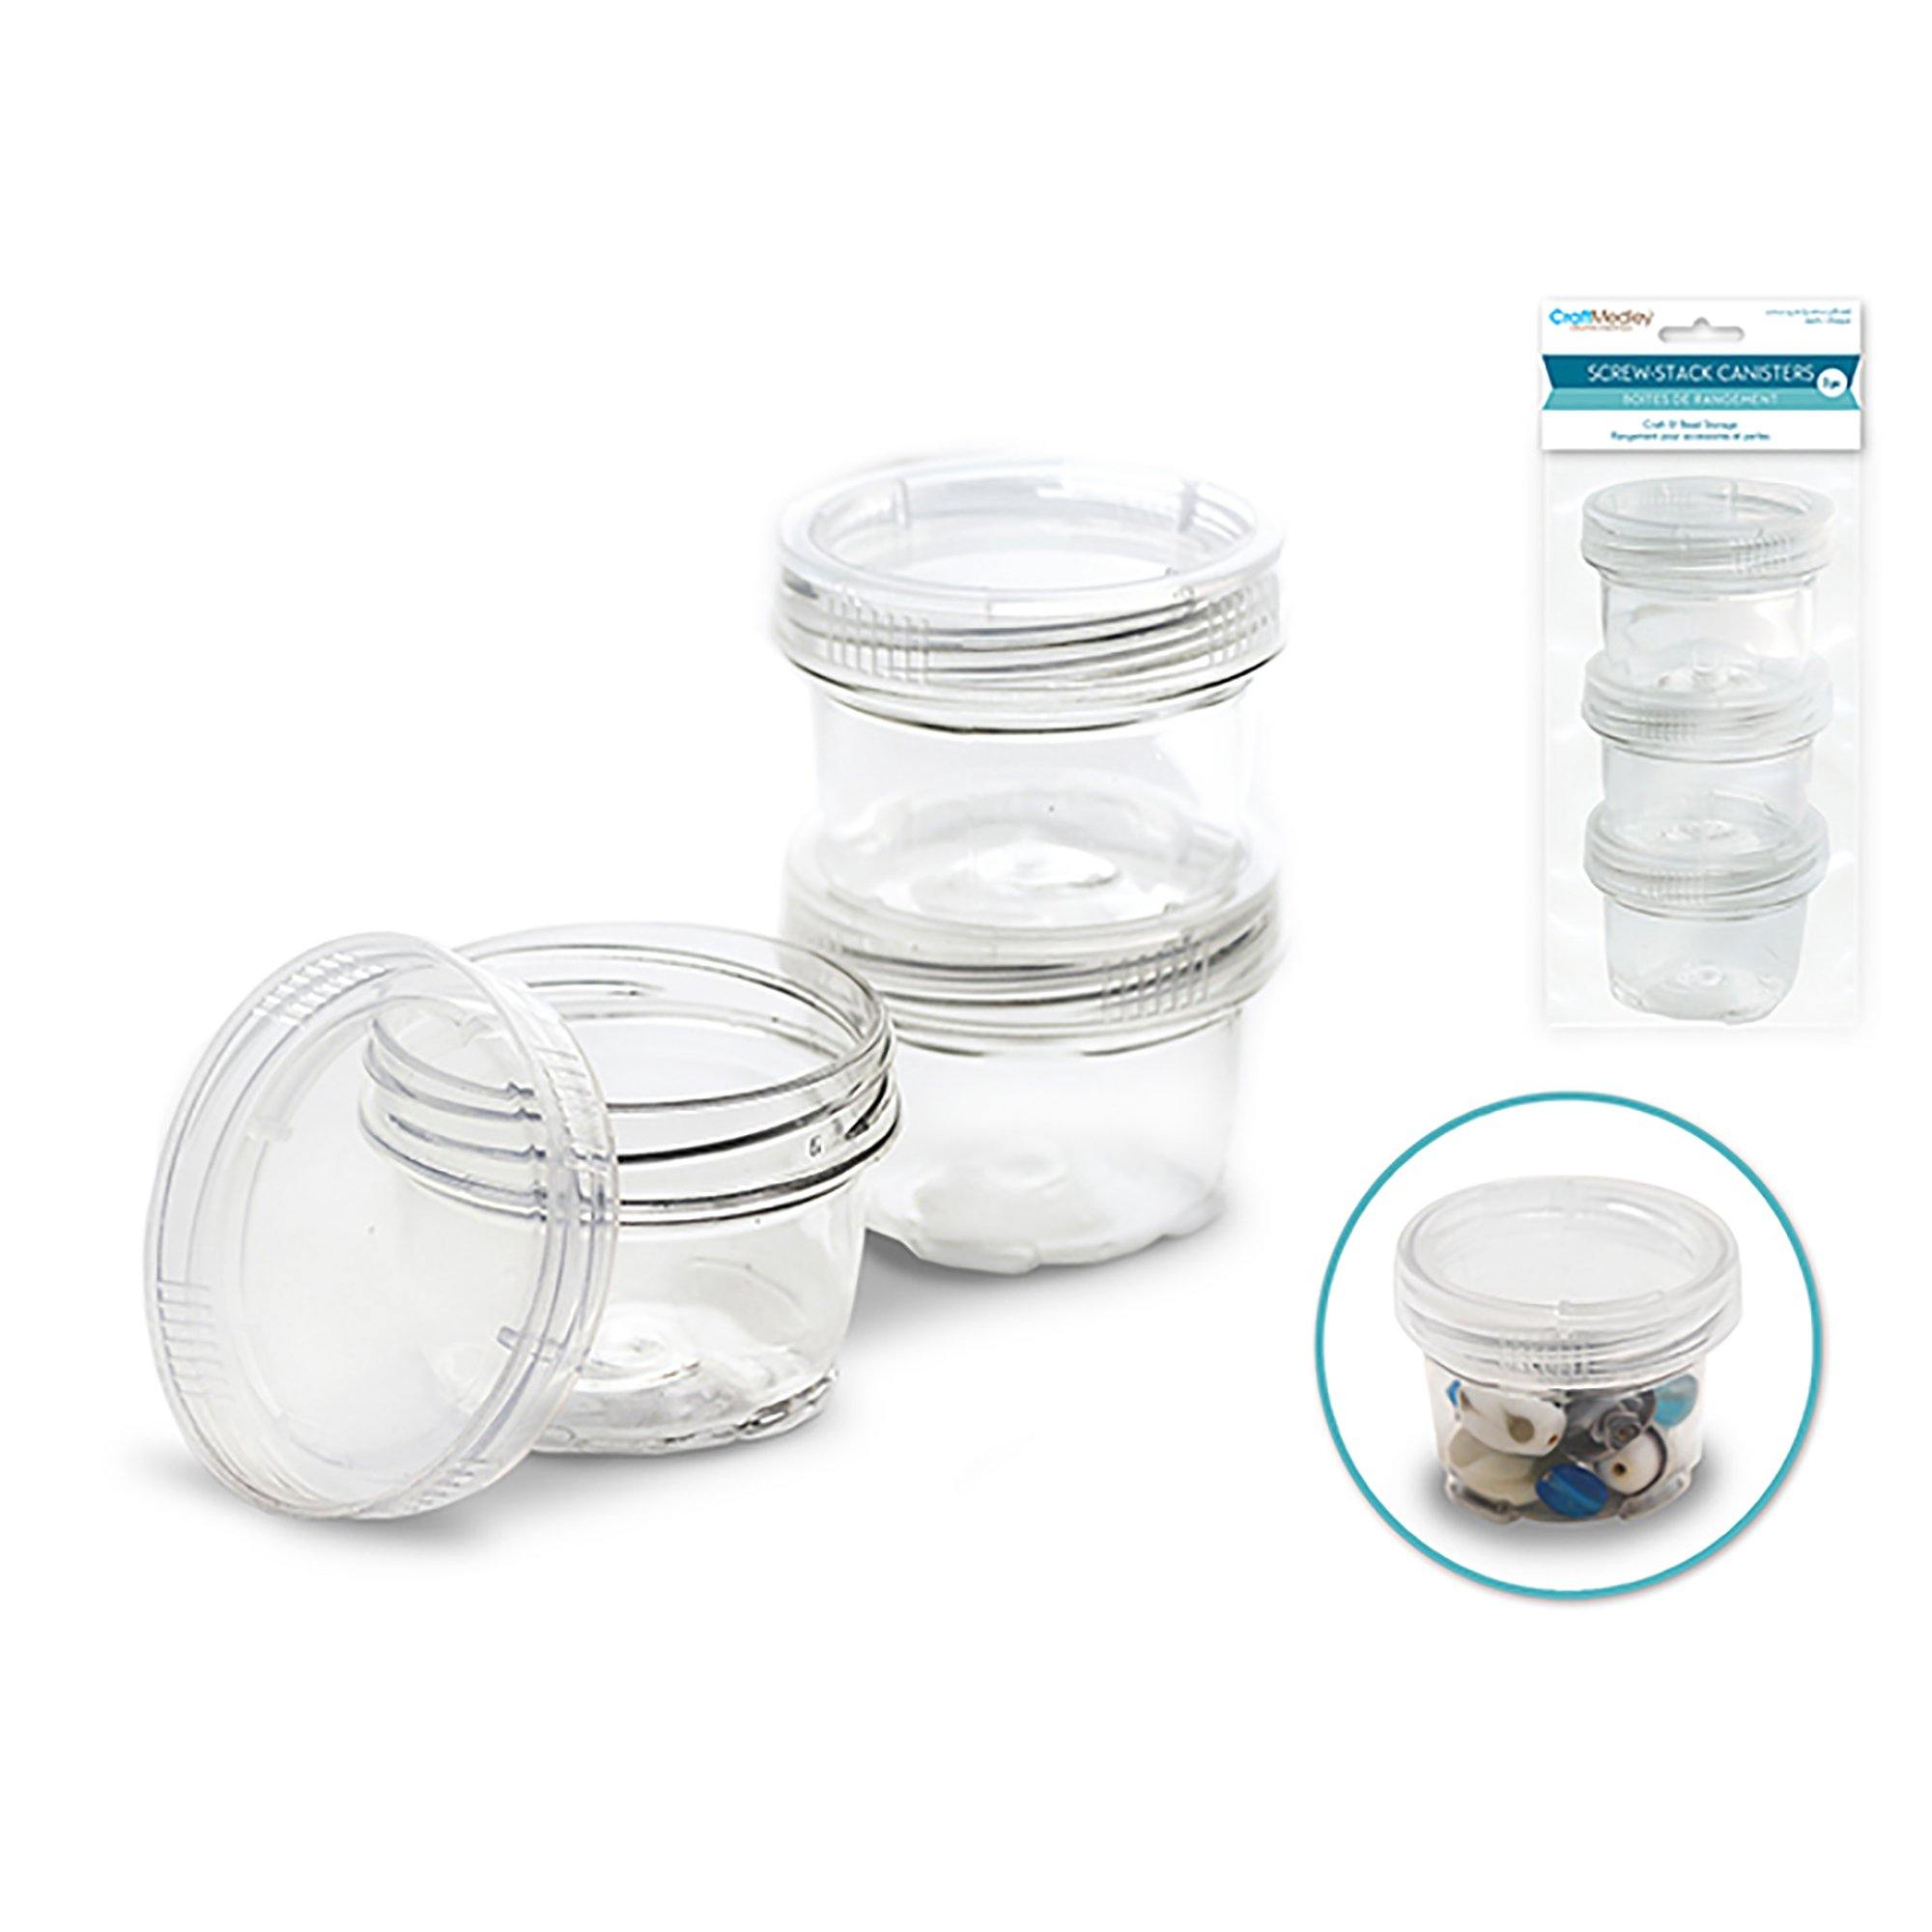 Craft / Bead Storage : 2"X1.5" Screw-Stack Canisters X3 - Dollar Max Dépôt